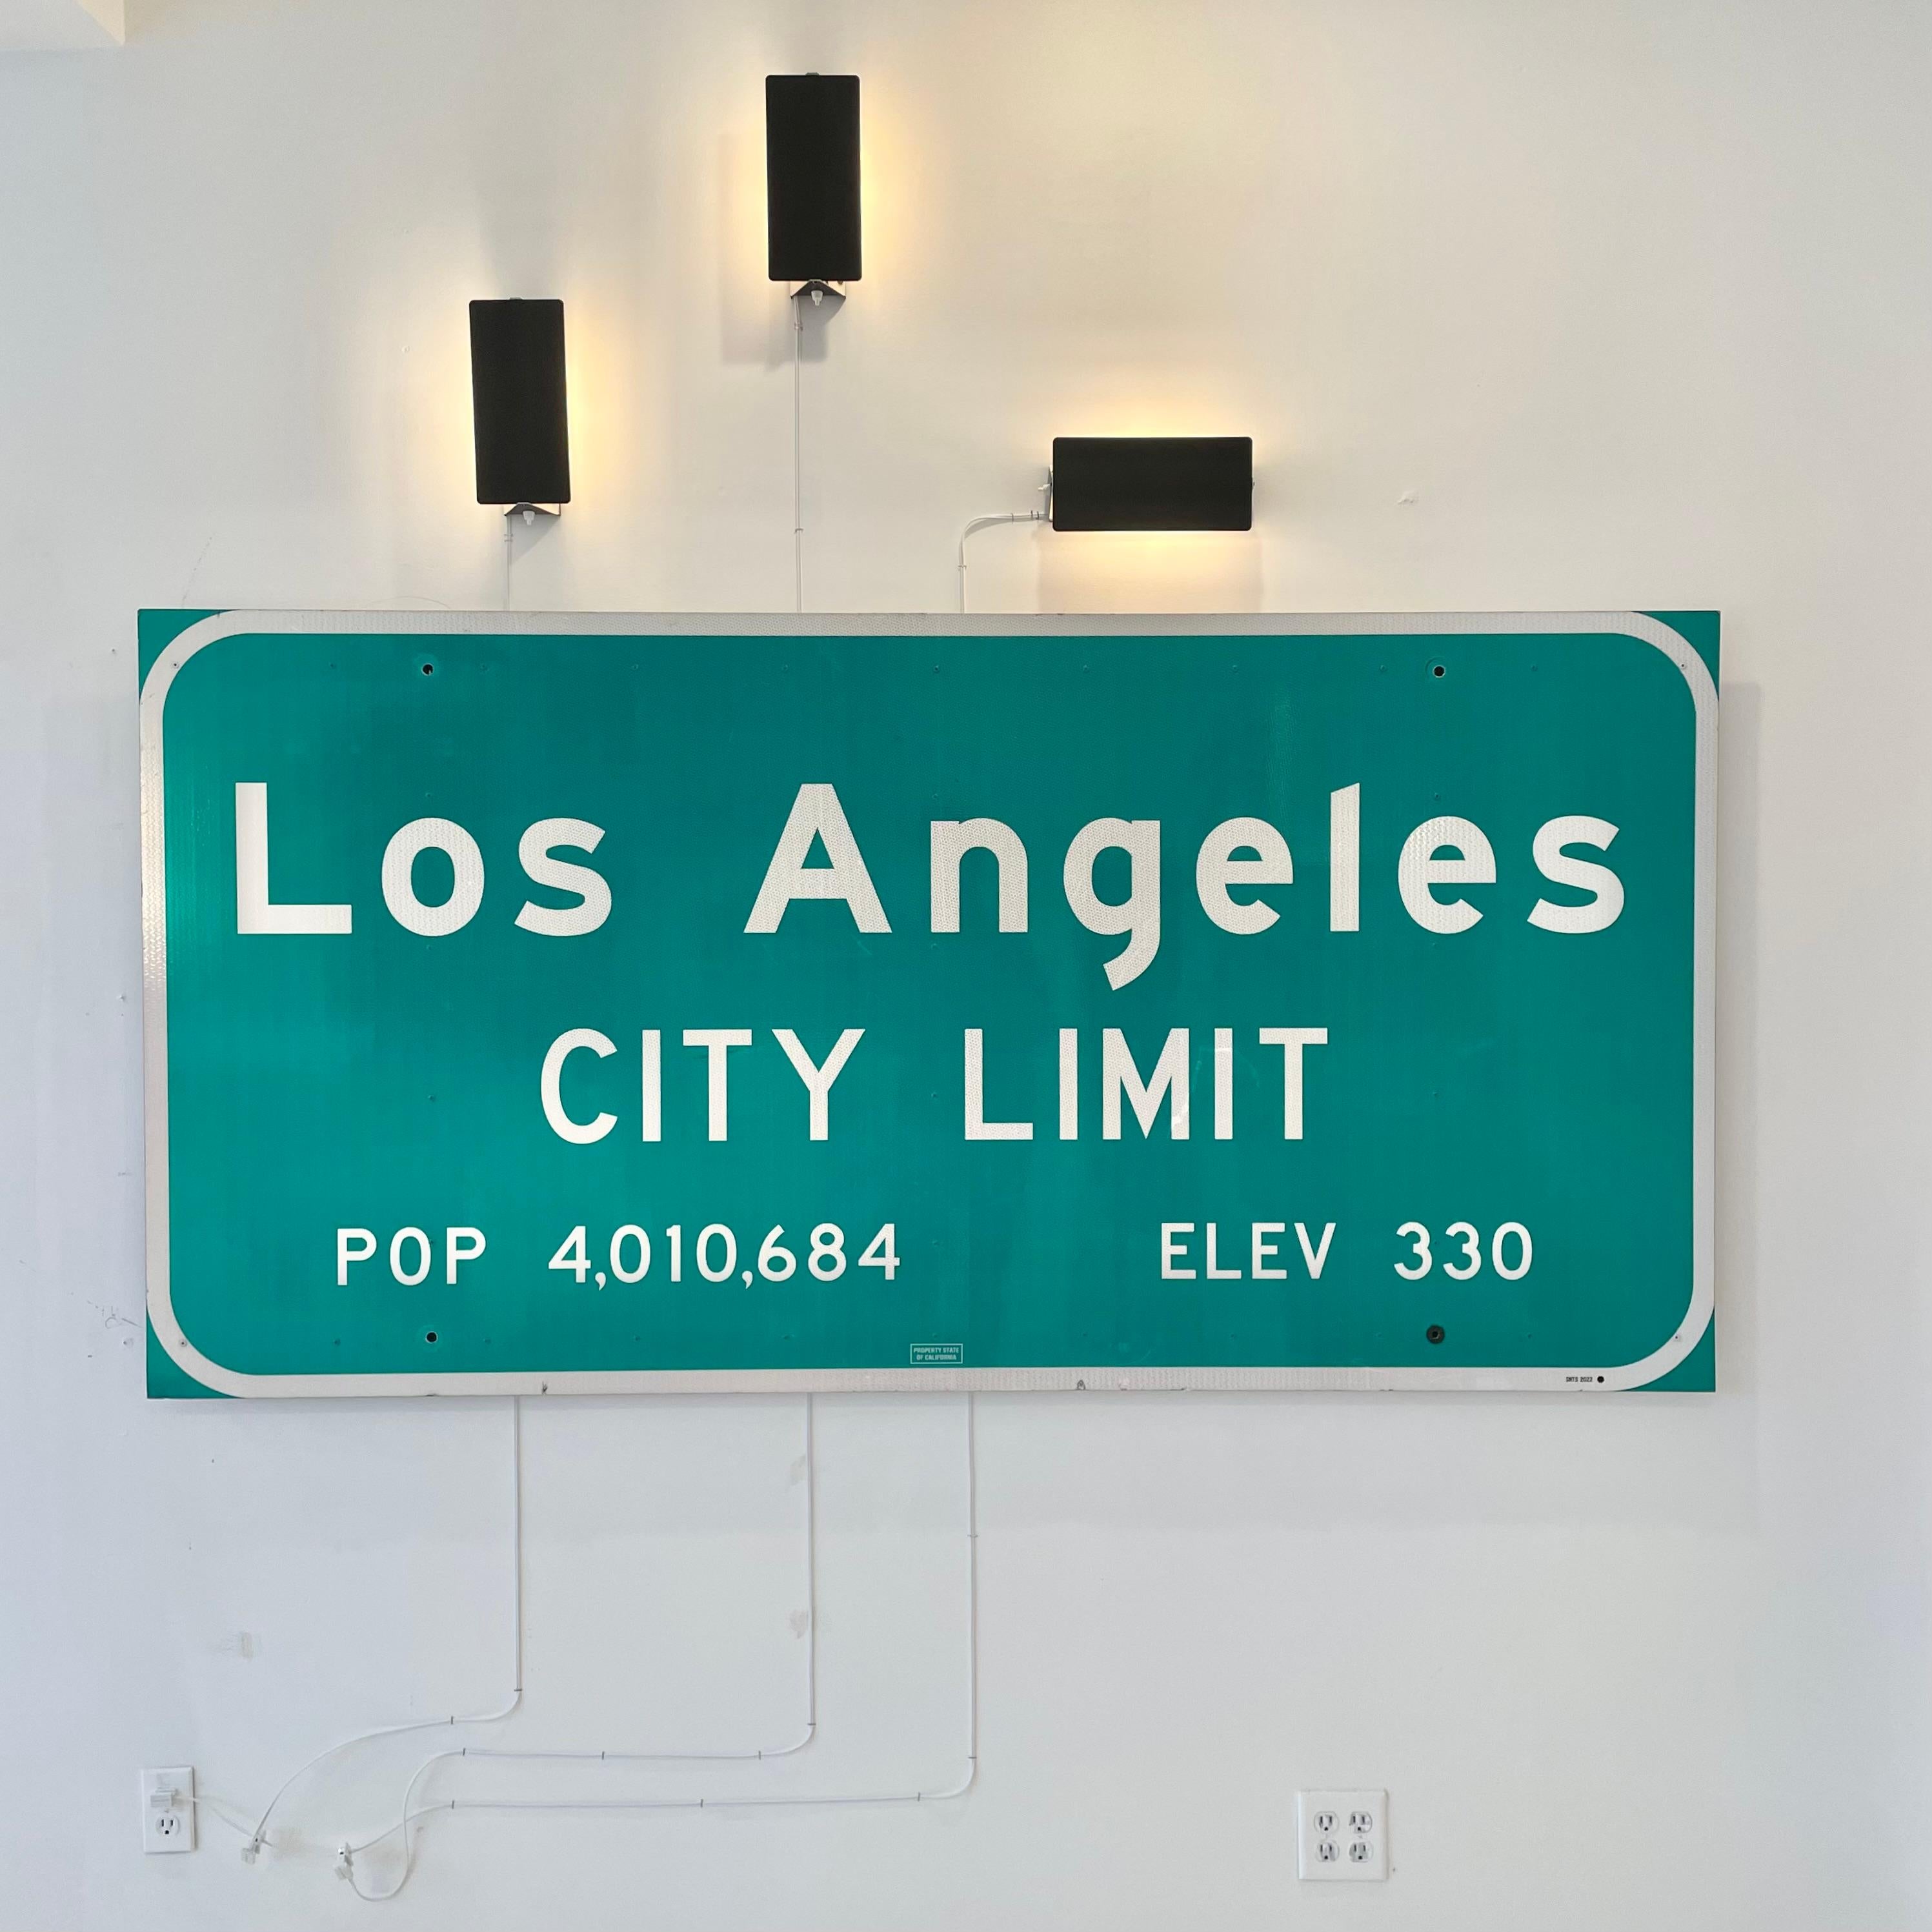 Amazing City of Los Angeles freeway sign. This sign welcomed you as you entered the city of Los Angeles. Reflective letters and border as well as a protective plastic sheet over the face. Stamped 